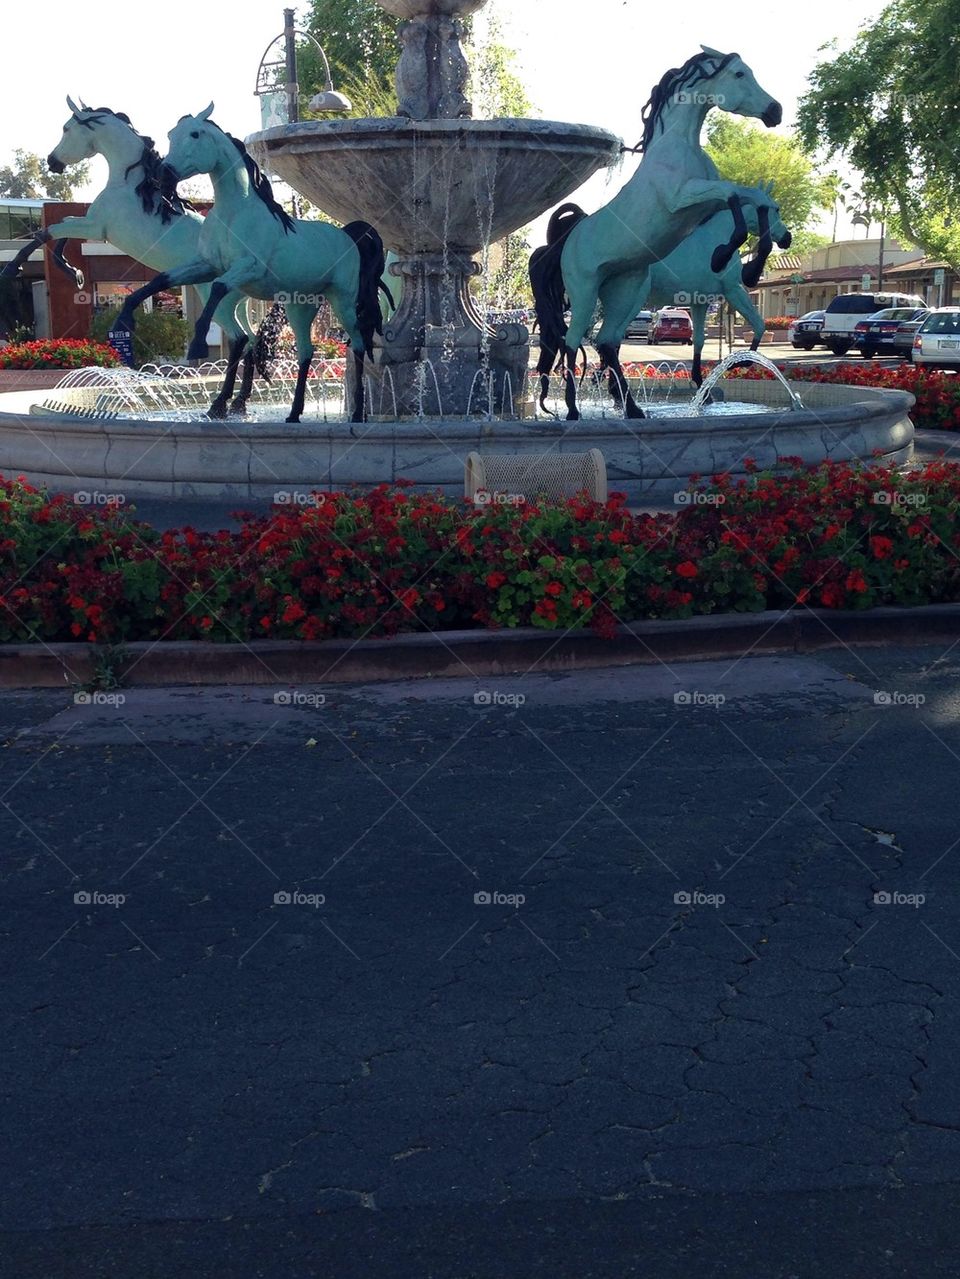 Horses in a fountain